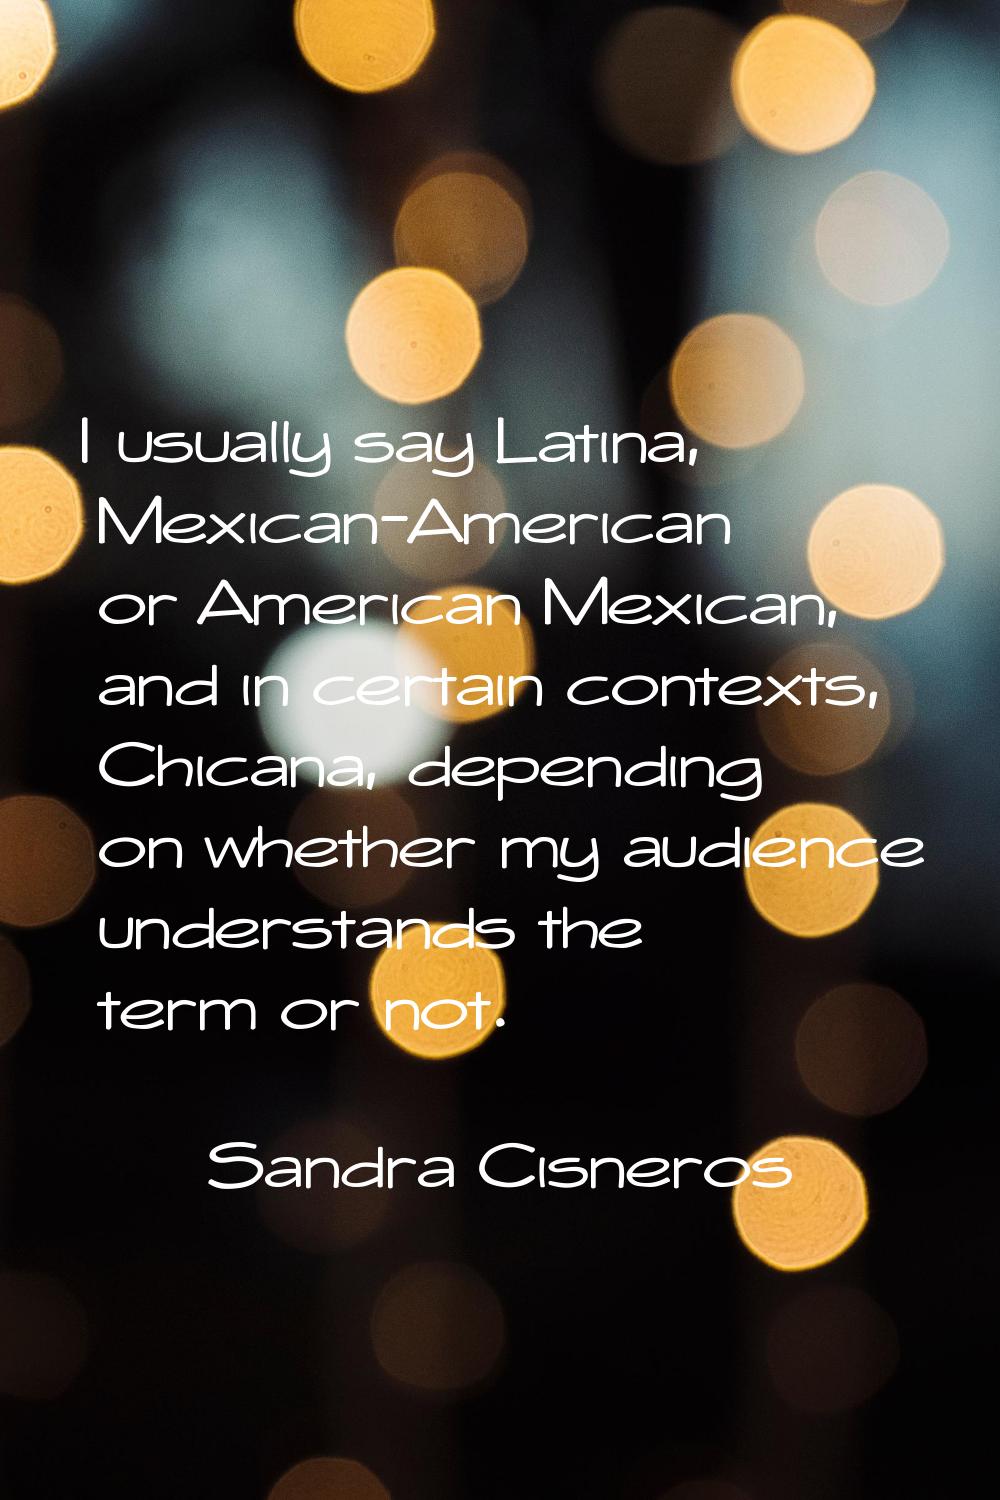 I usually say Latina, Mexican-American or American Mexican, and in certain contexts, Chicana, depen